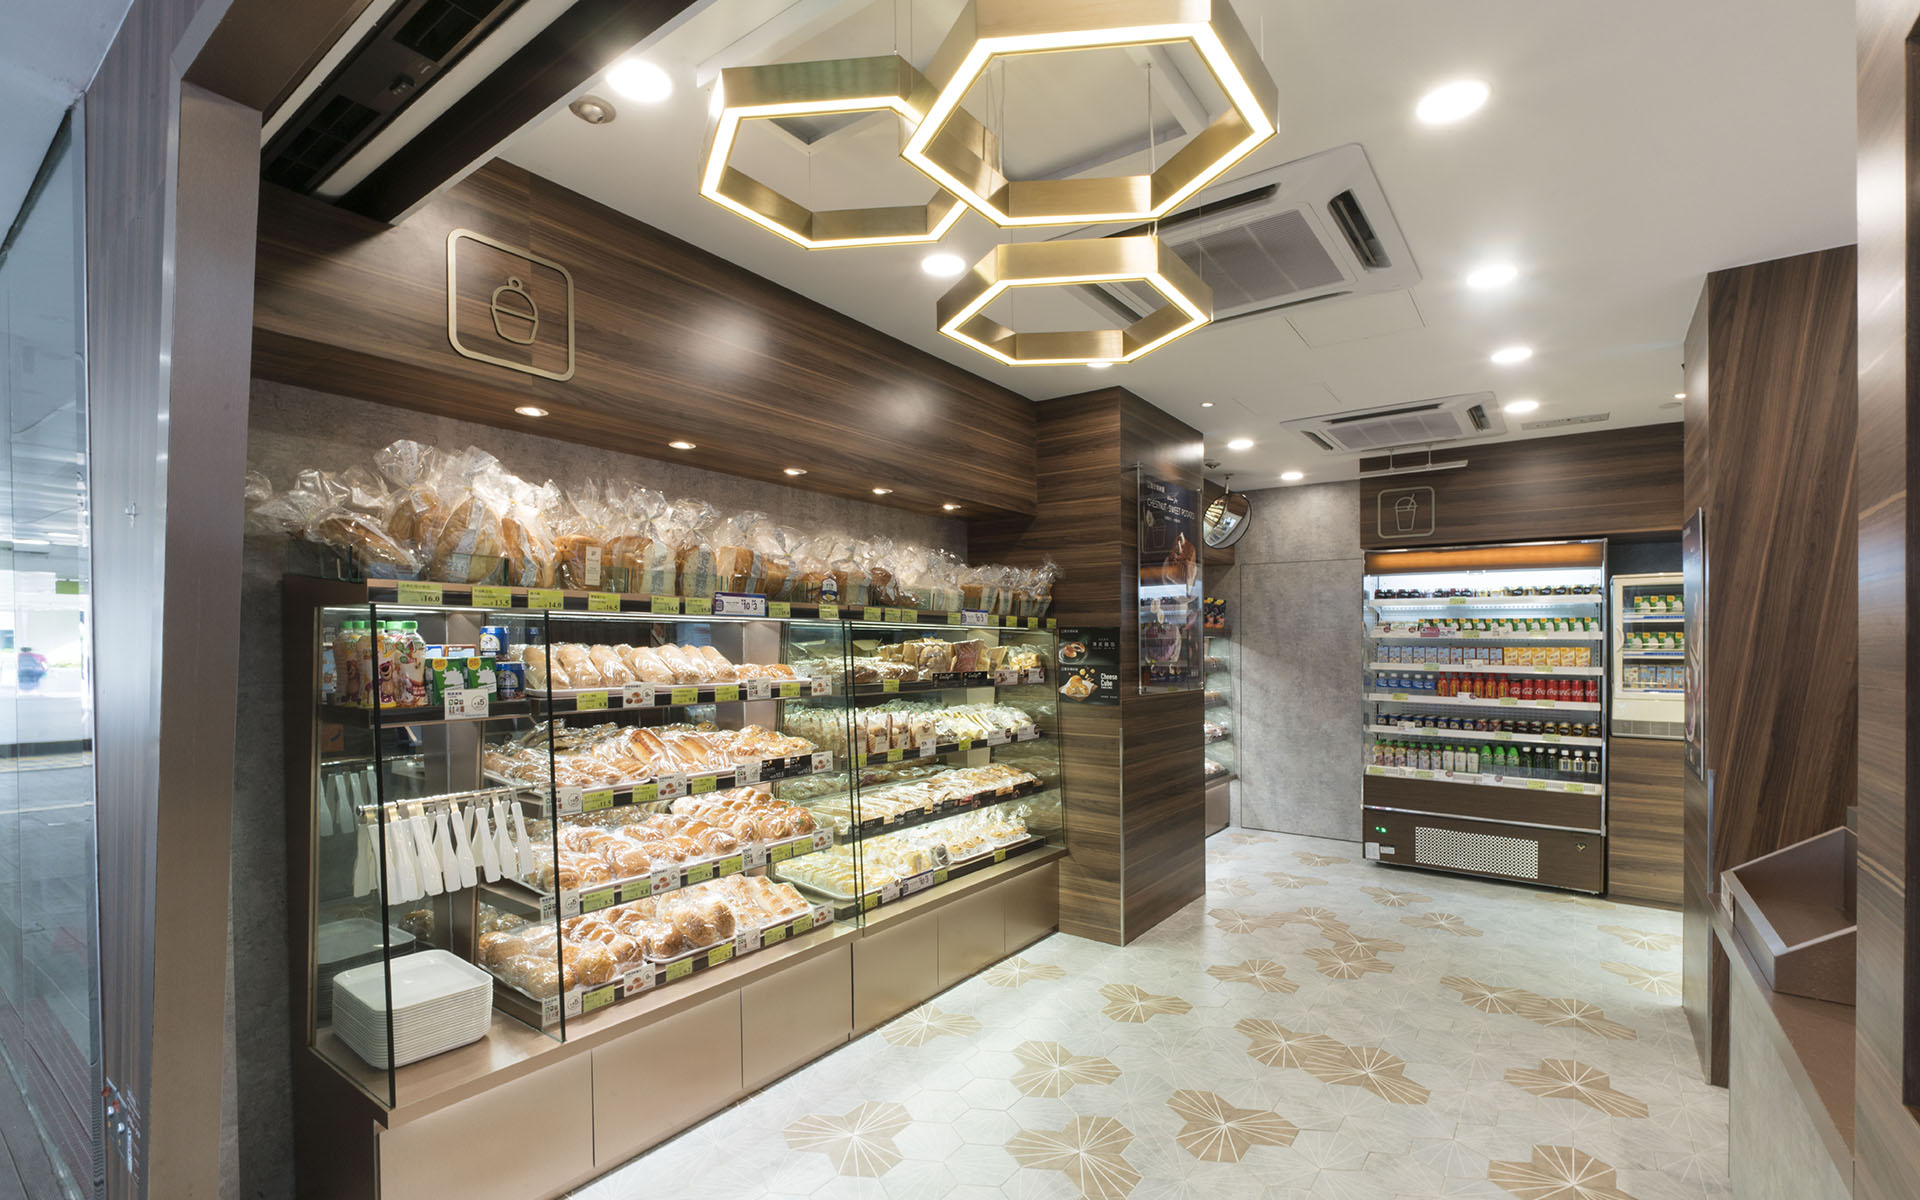 Saint Honore Cake Shop K-Point Hong Kong Store Interior Design and Styling by Plaap Design